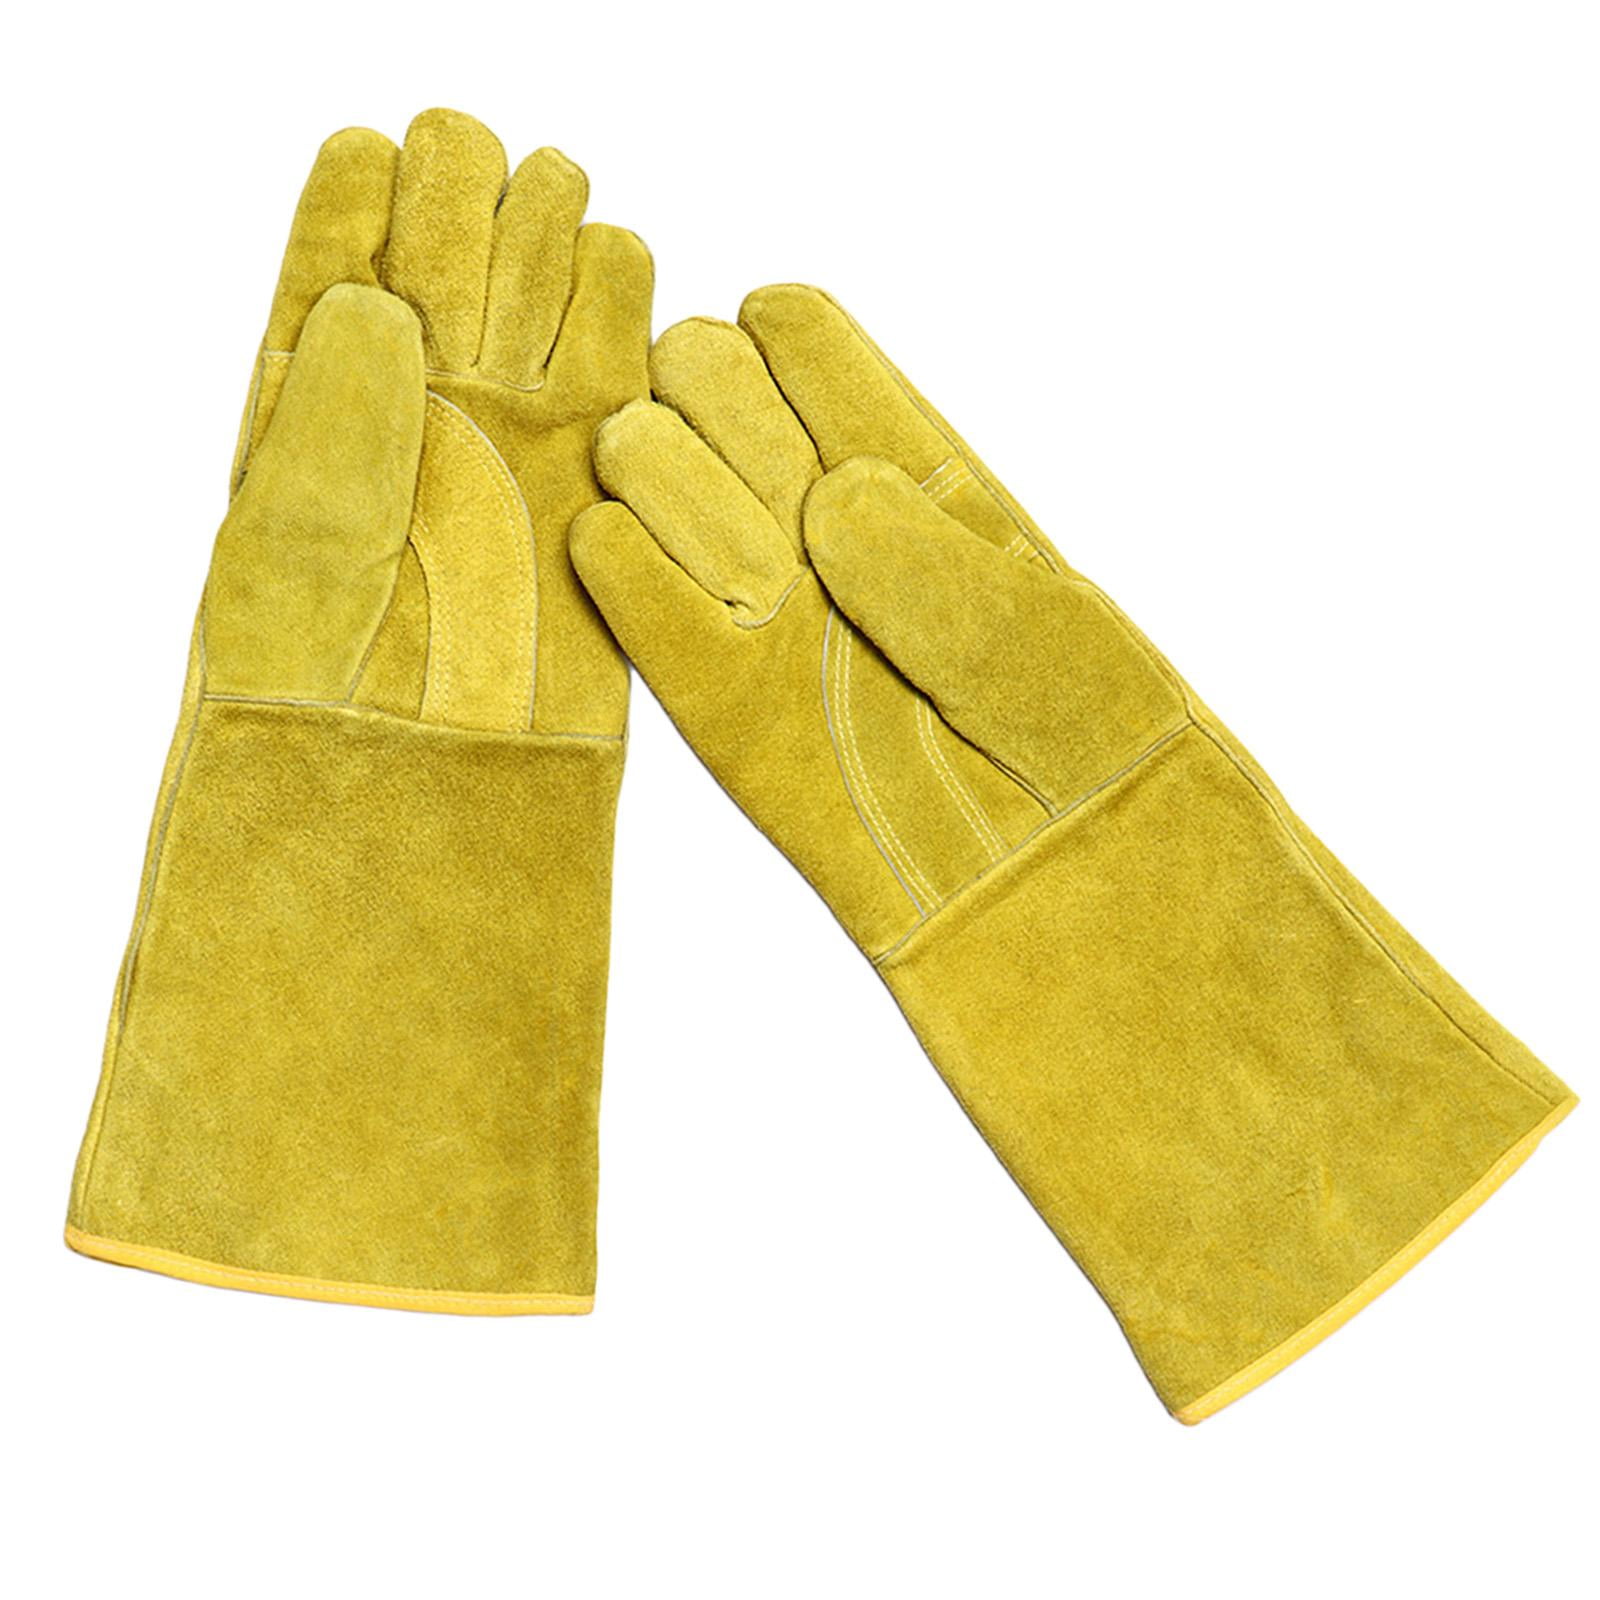 Details about   14" Welding Gloves 1Pair Leather Heat Resistant BBQ Cooking Safe Gloves US Stock 